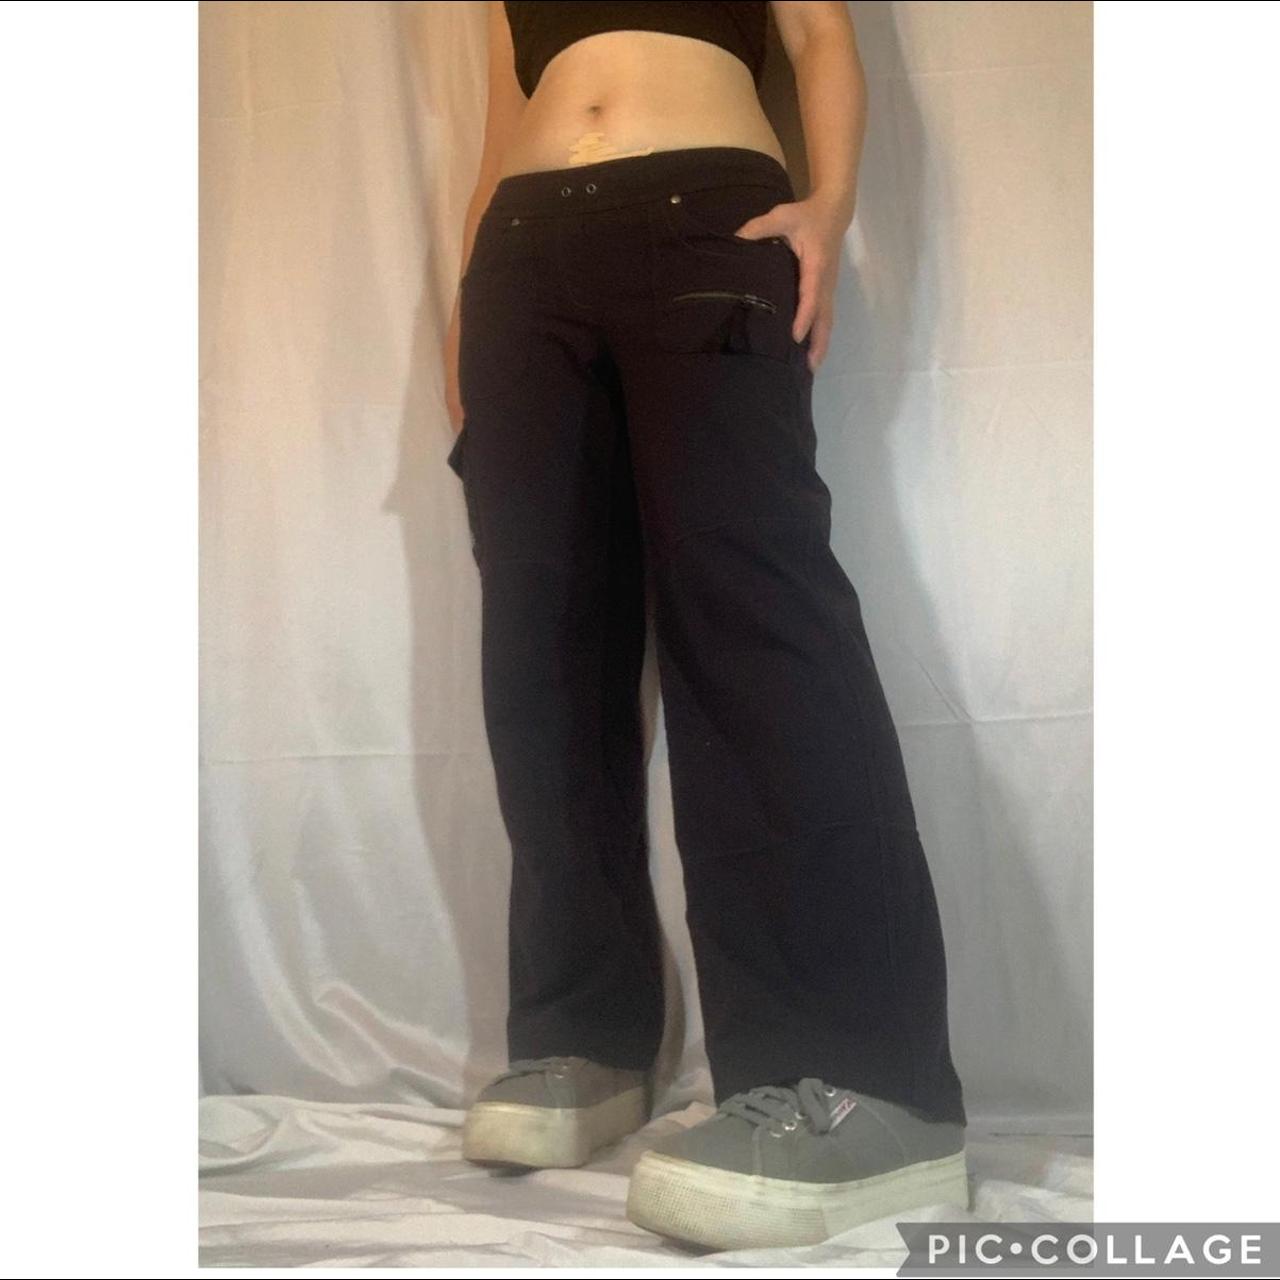 Product Image 2 - Black low rise cargo pants(b1)
Wide